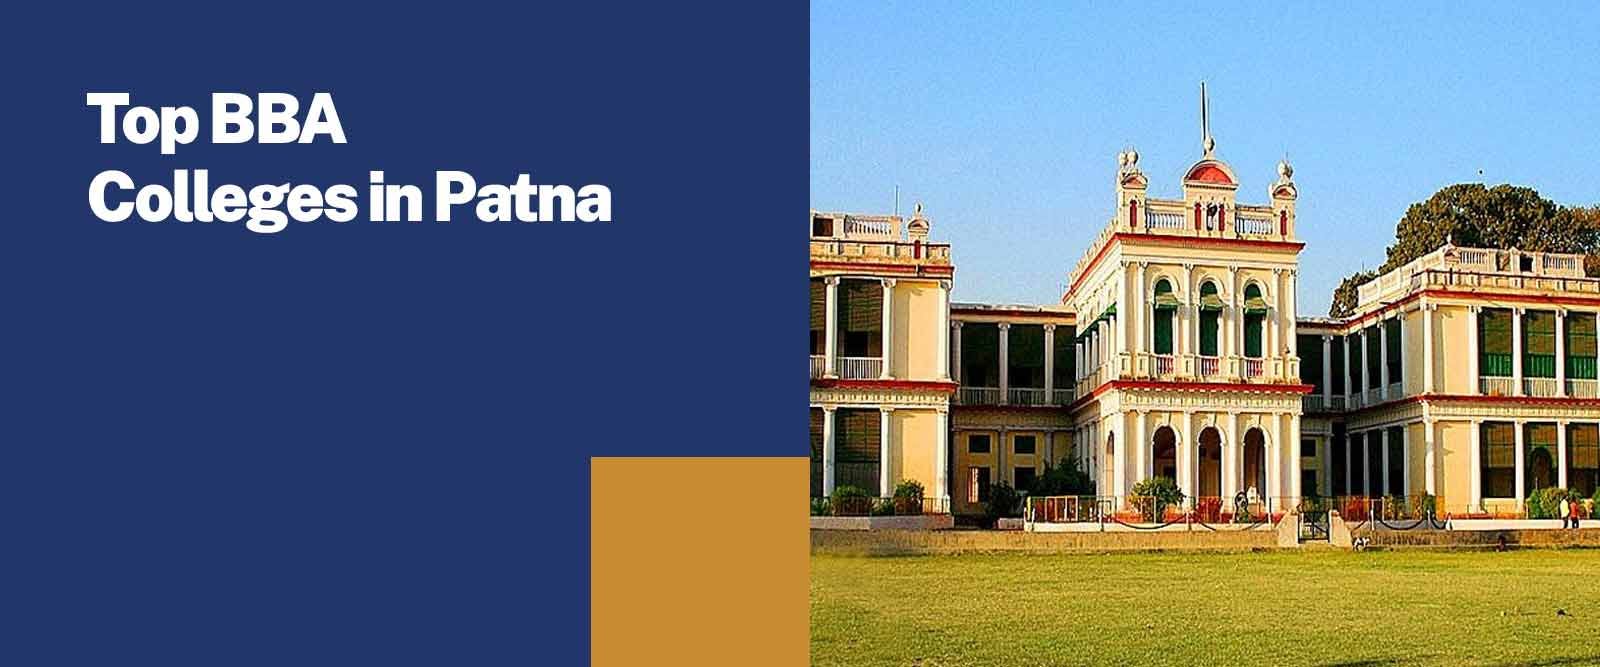 Top BBA Colleges in Patna